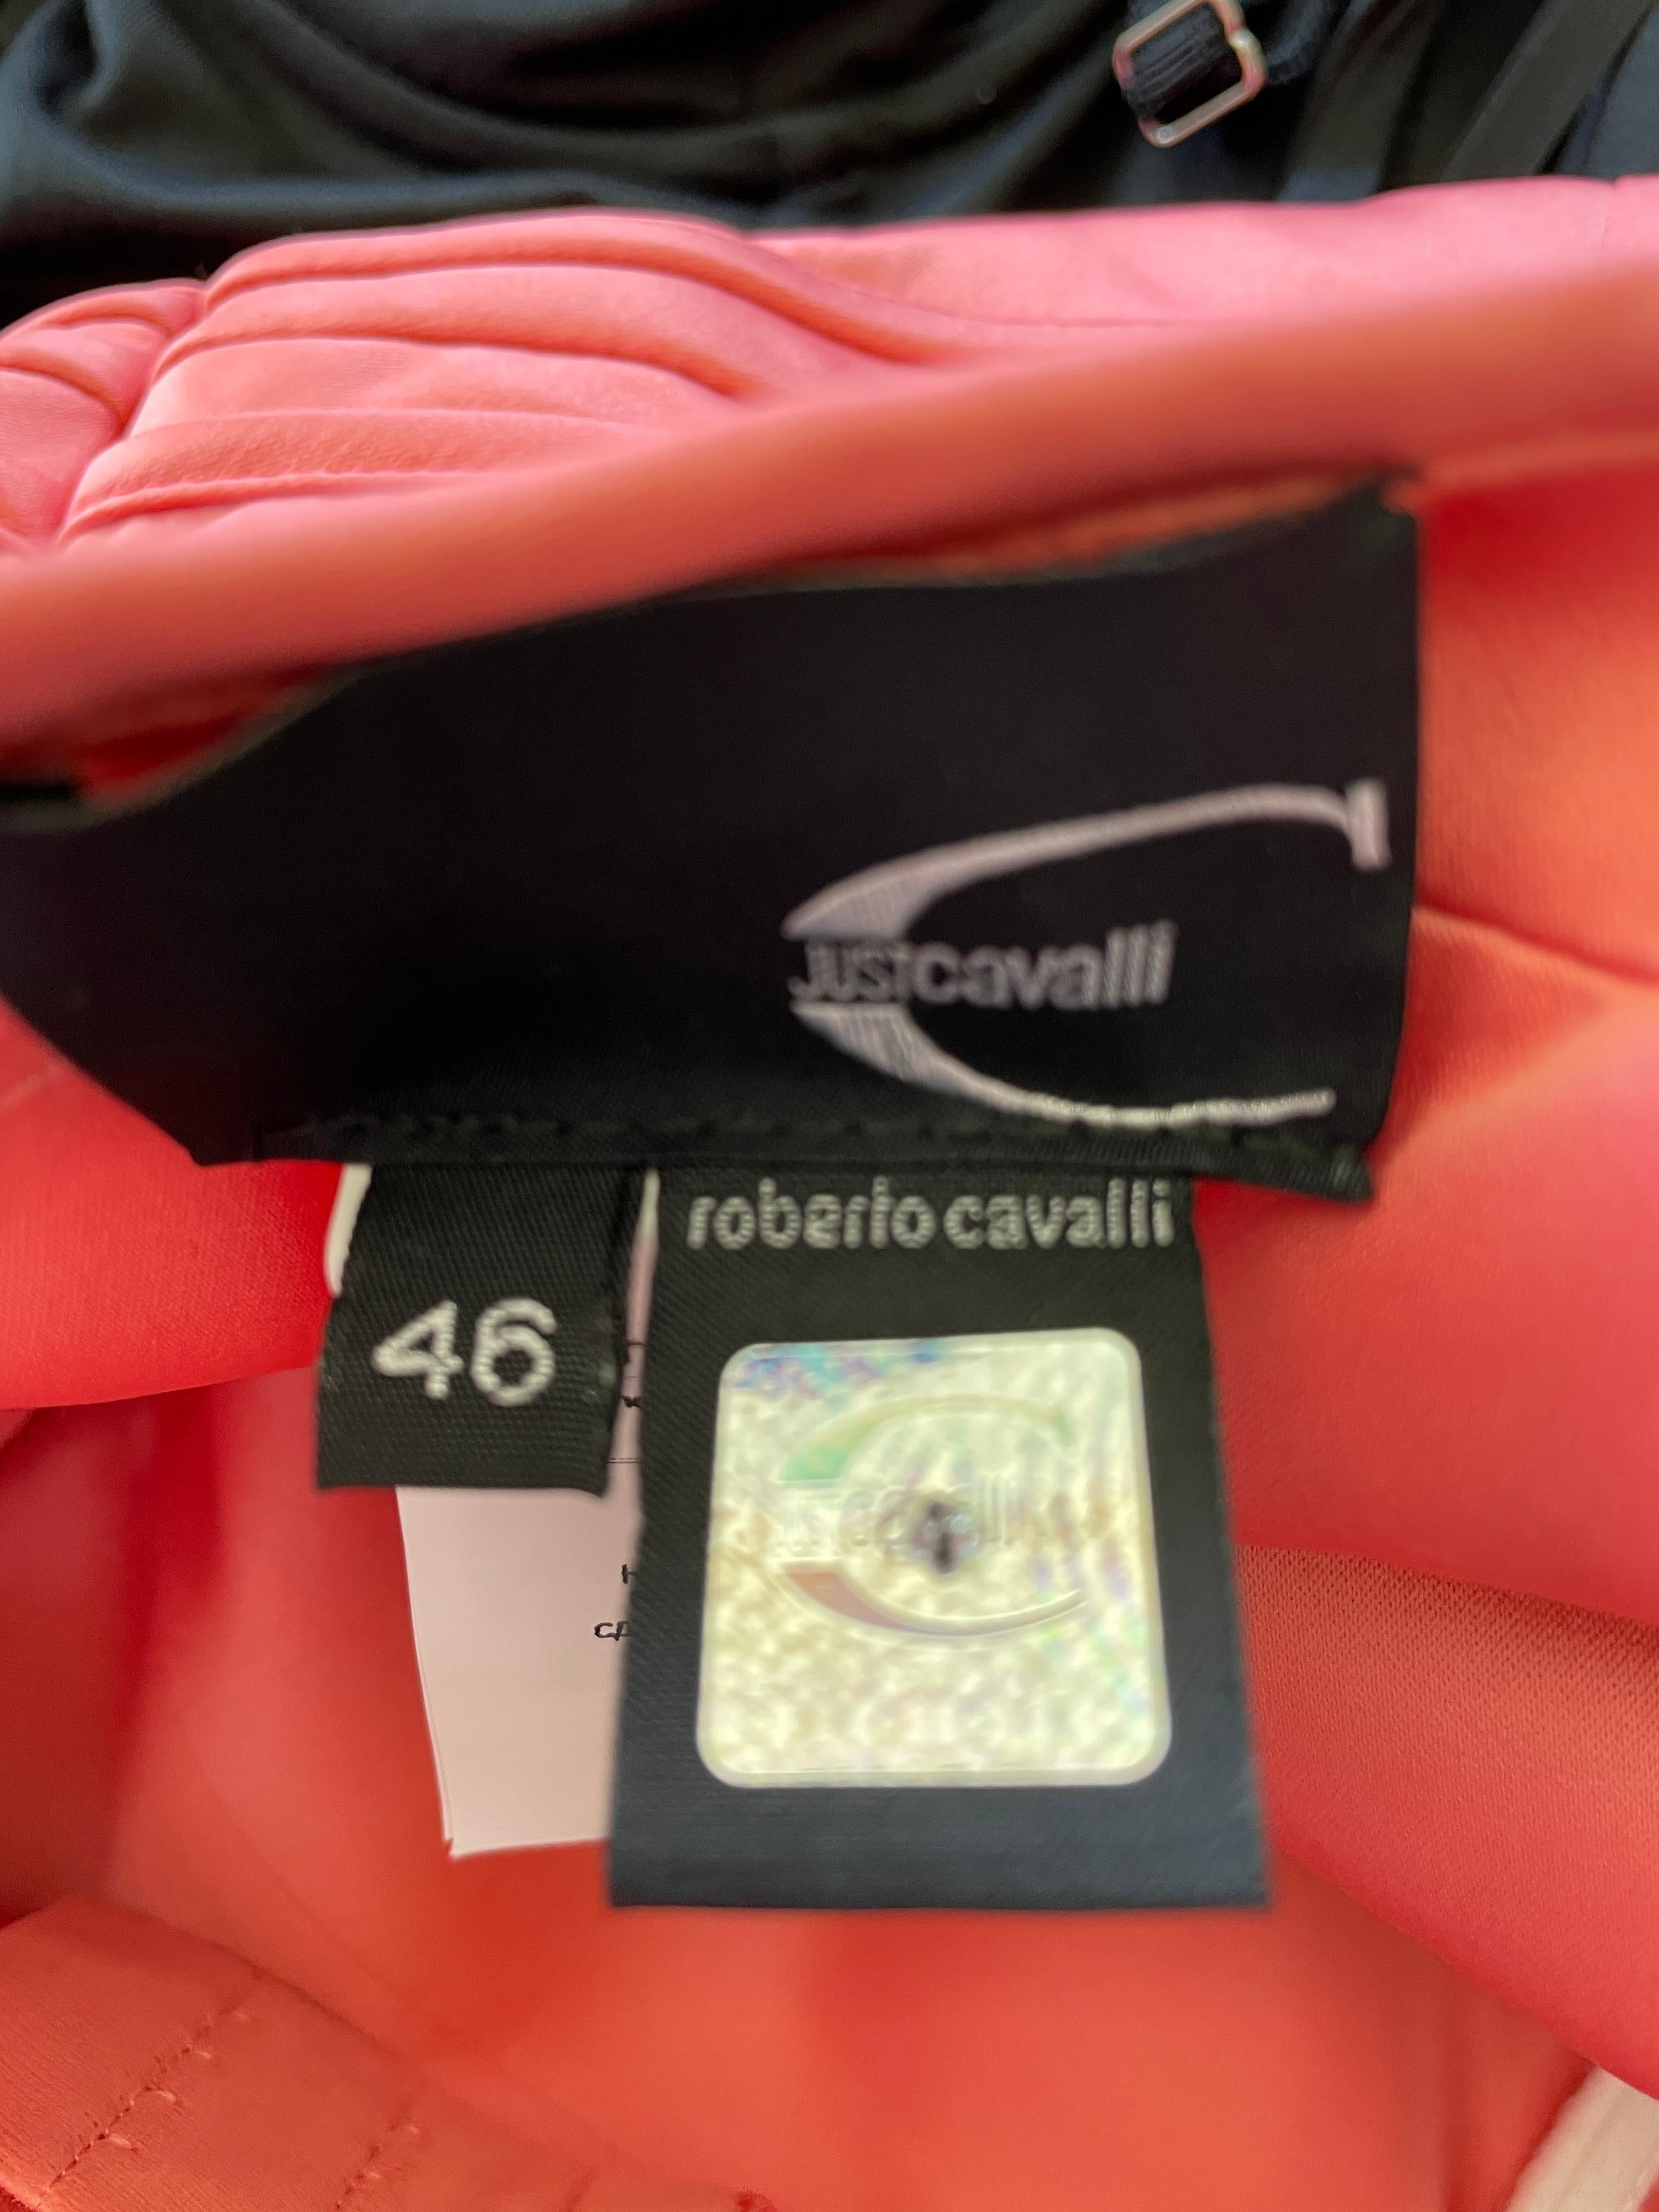 Just Cavalli Sexy Pink Corset Cocktail Dress by Roberto Cavalli For Sale 3